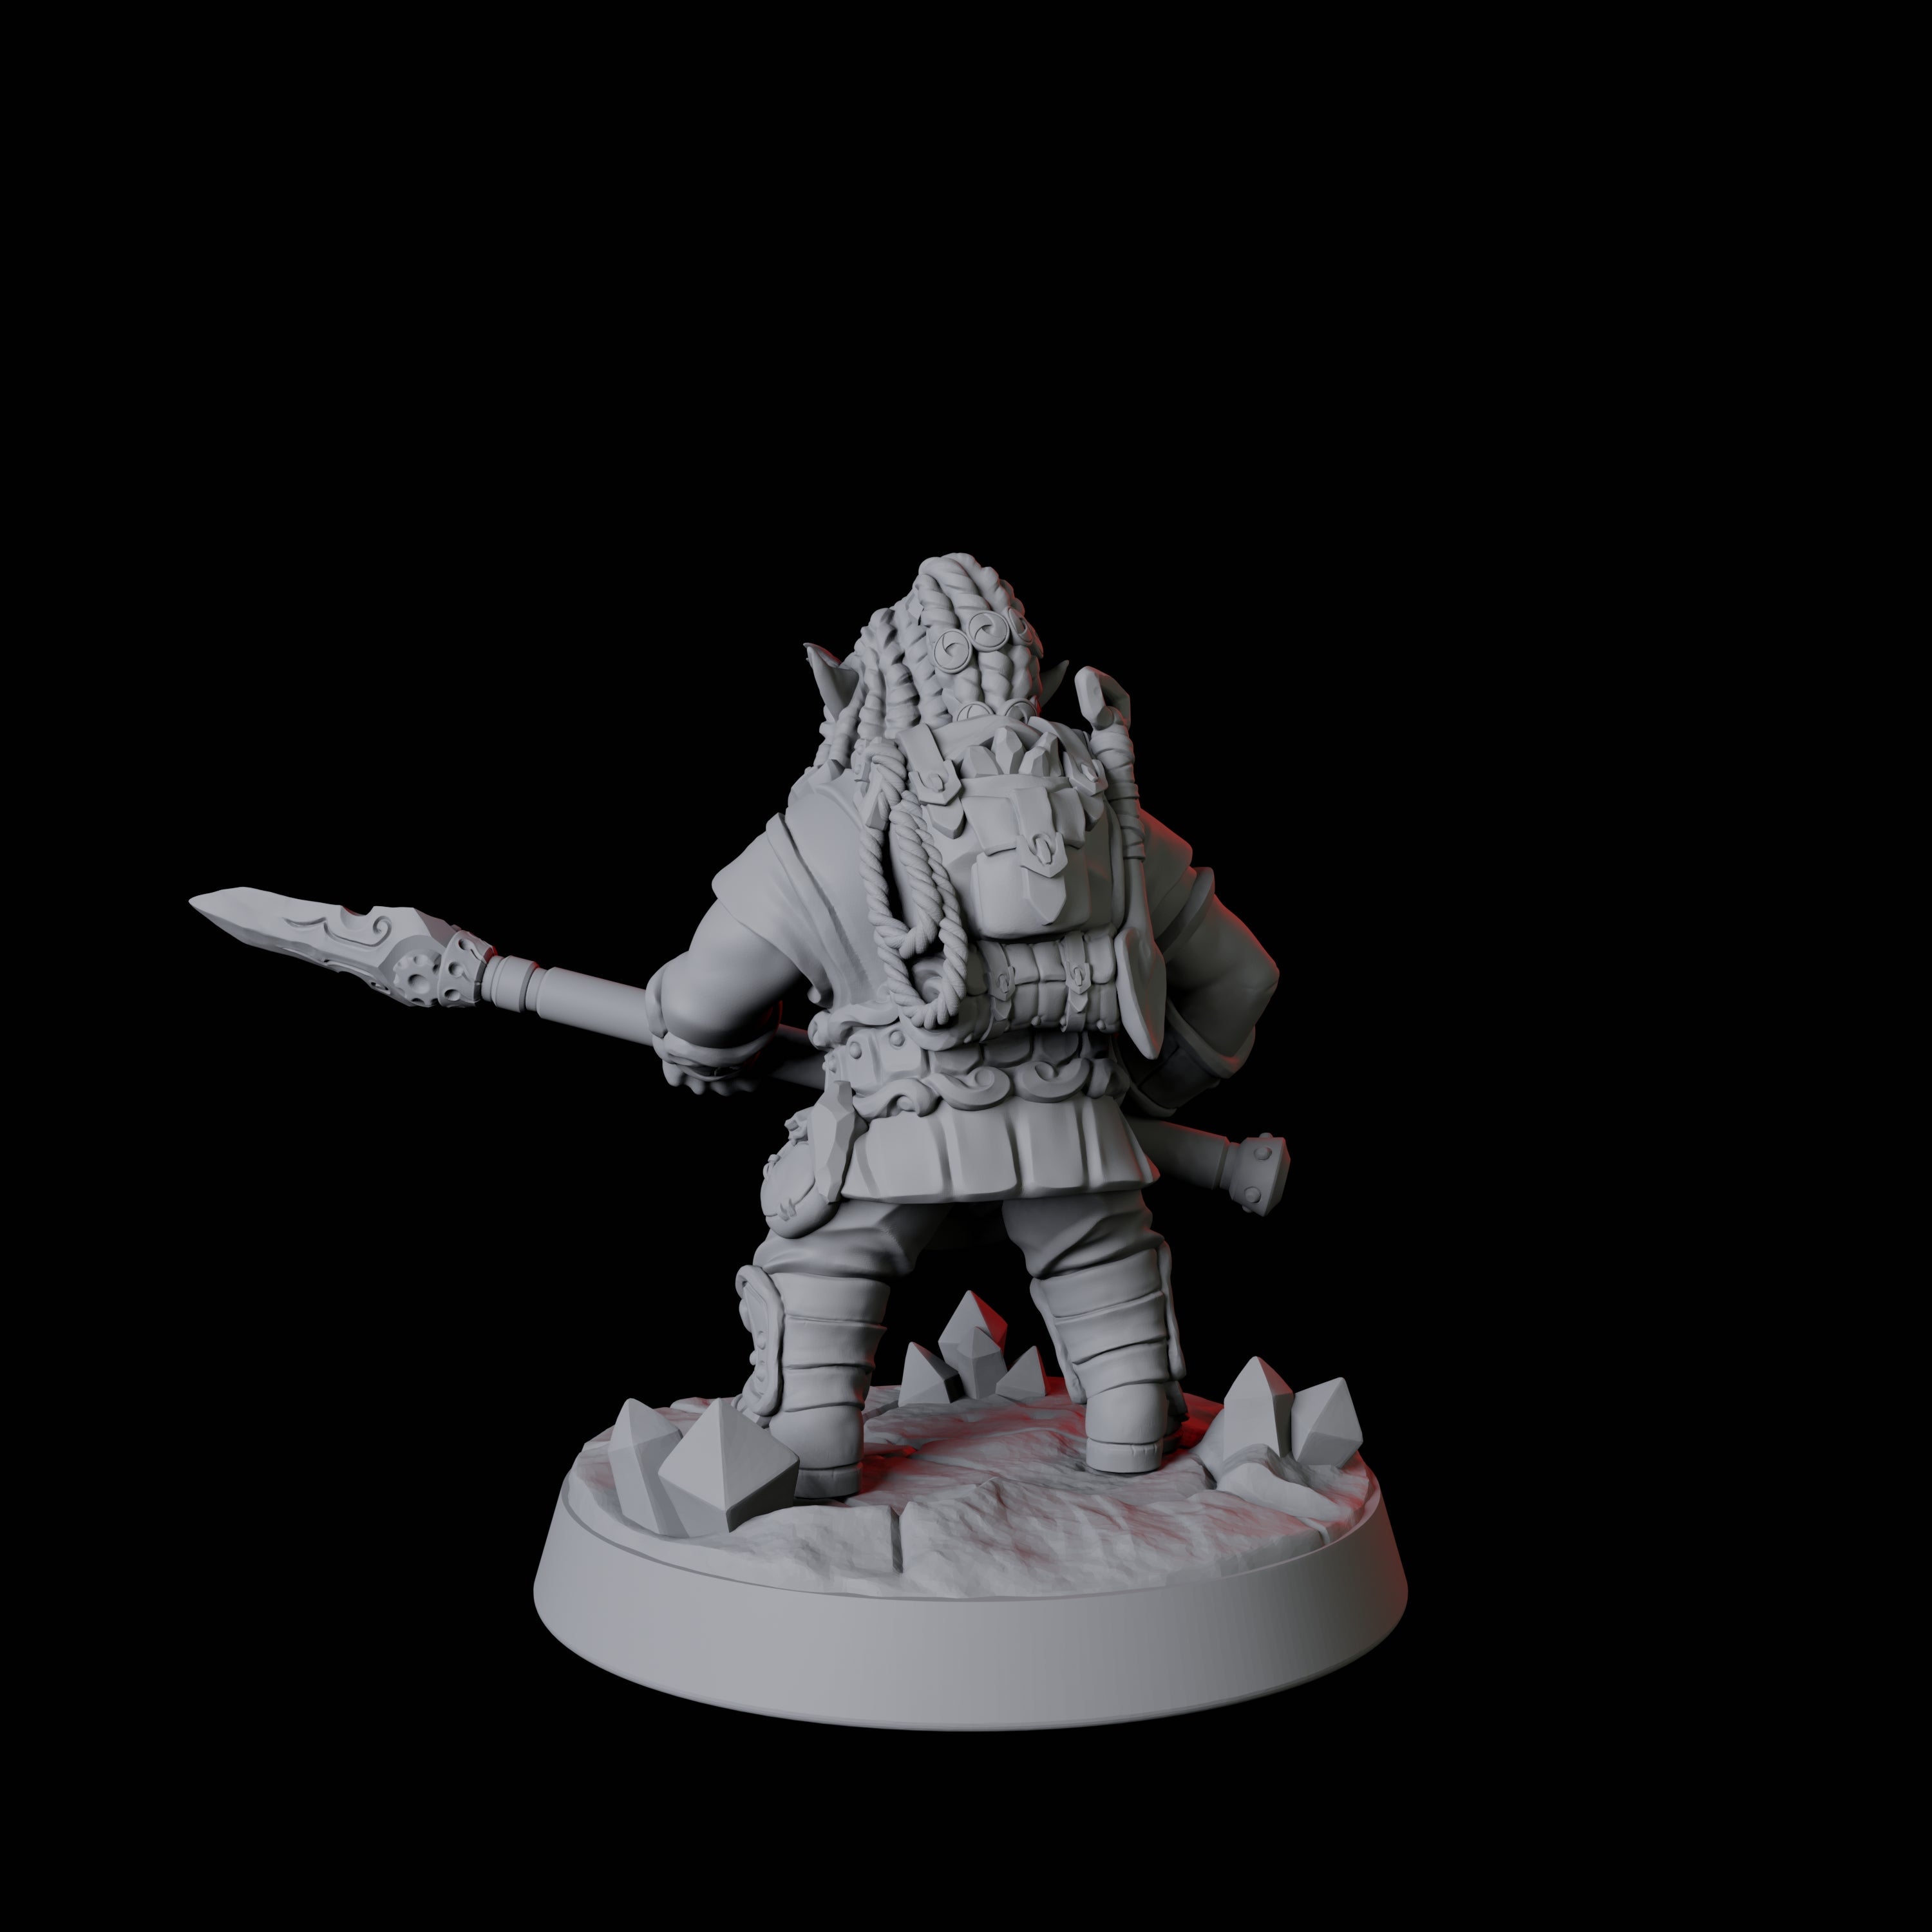 Gnome Miner B Miniature for Dungeons and Dragons, Pathfinder or other TTRPGs